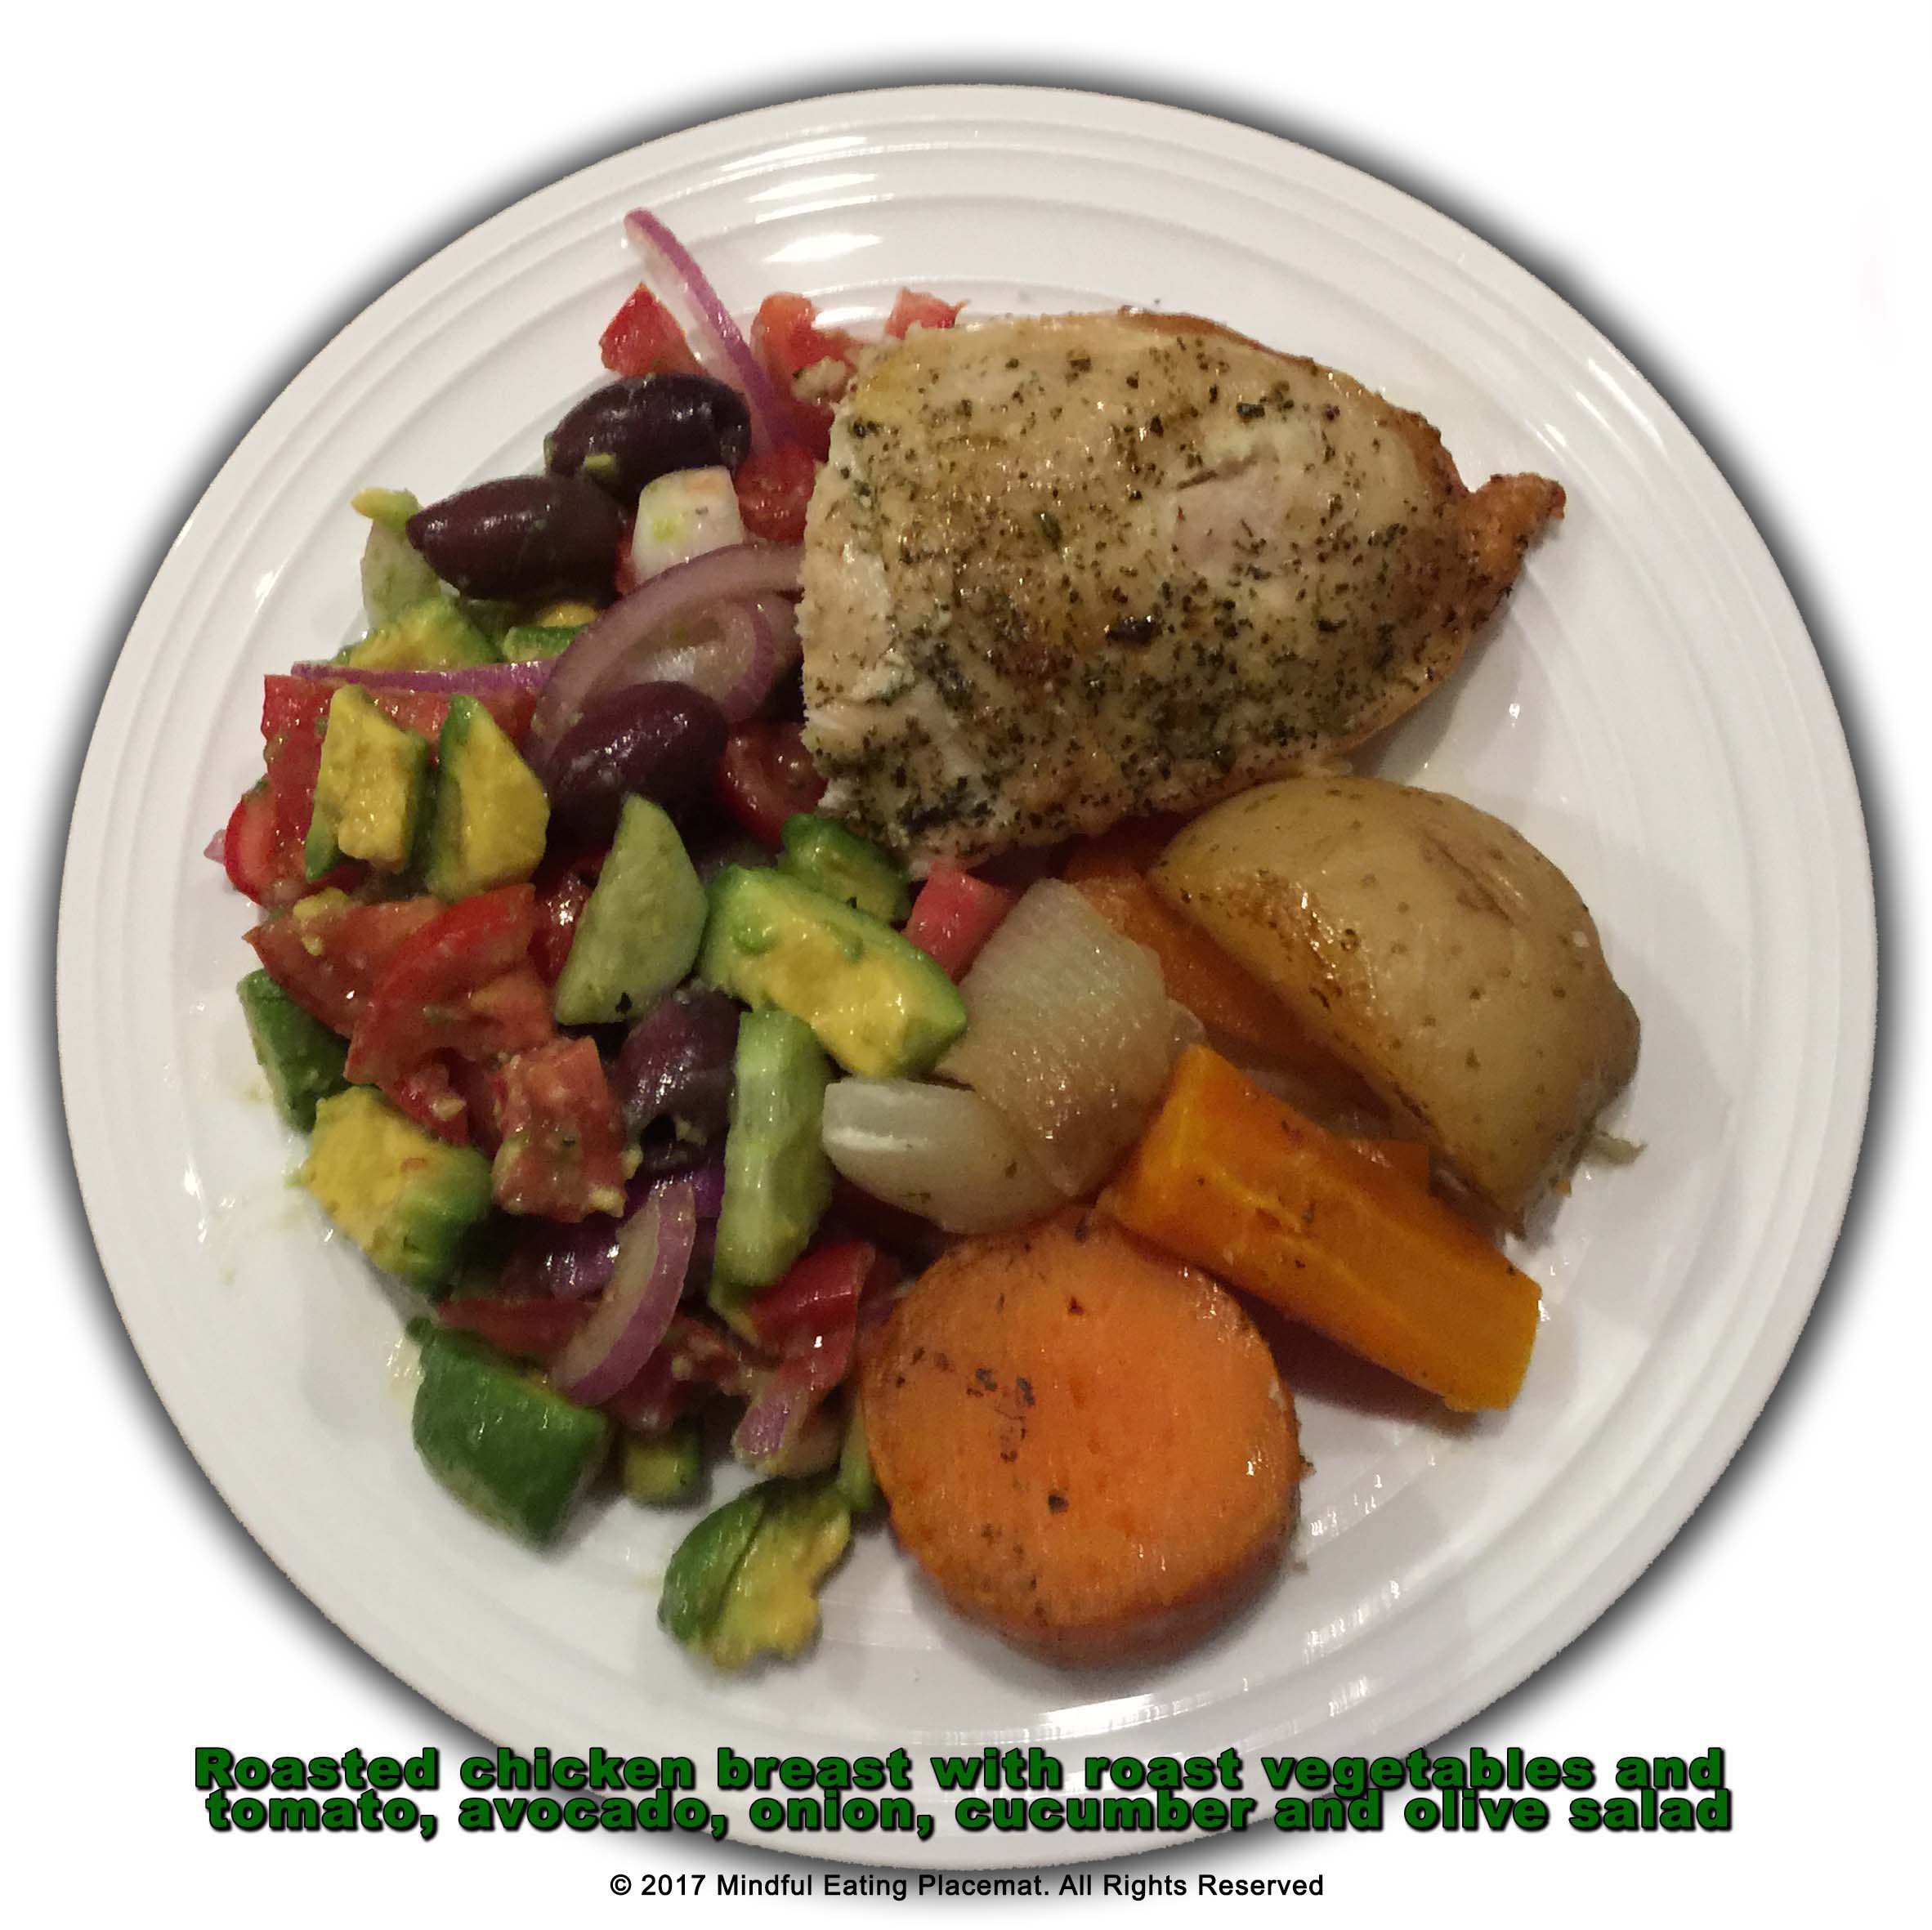 Roasted chicken with roast vegetables and avocado, tomato, cucumber, onion and olive salad